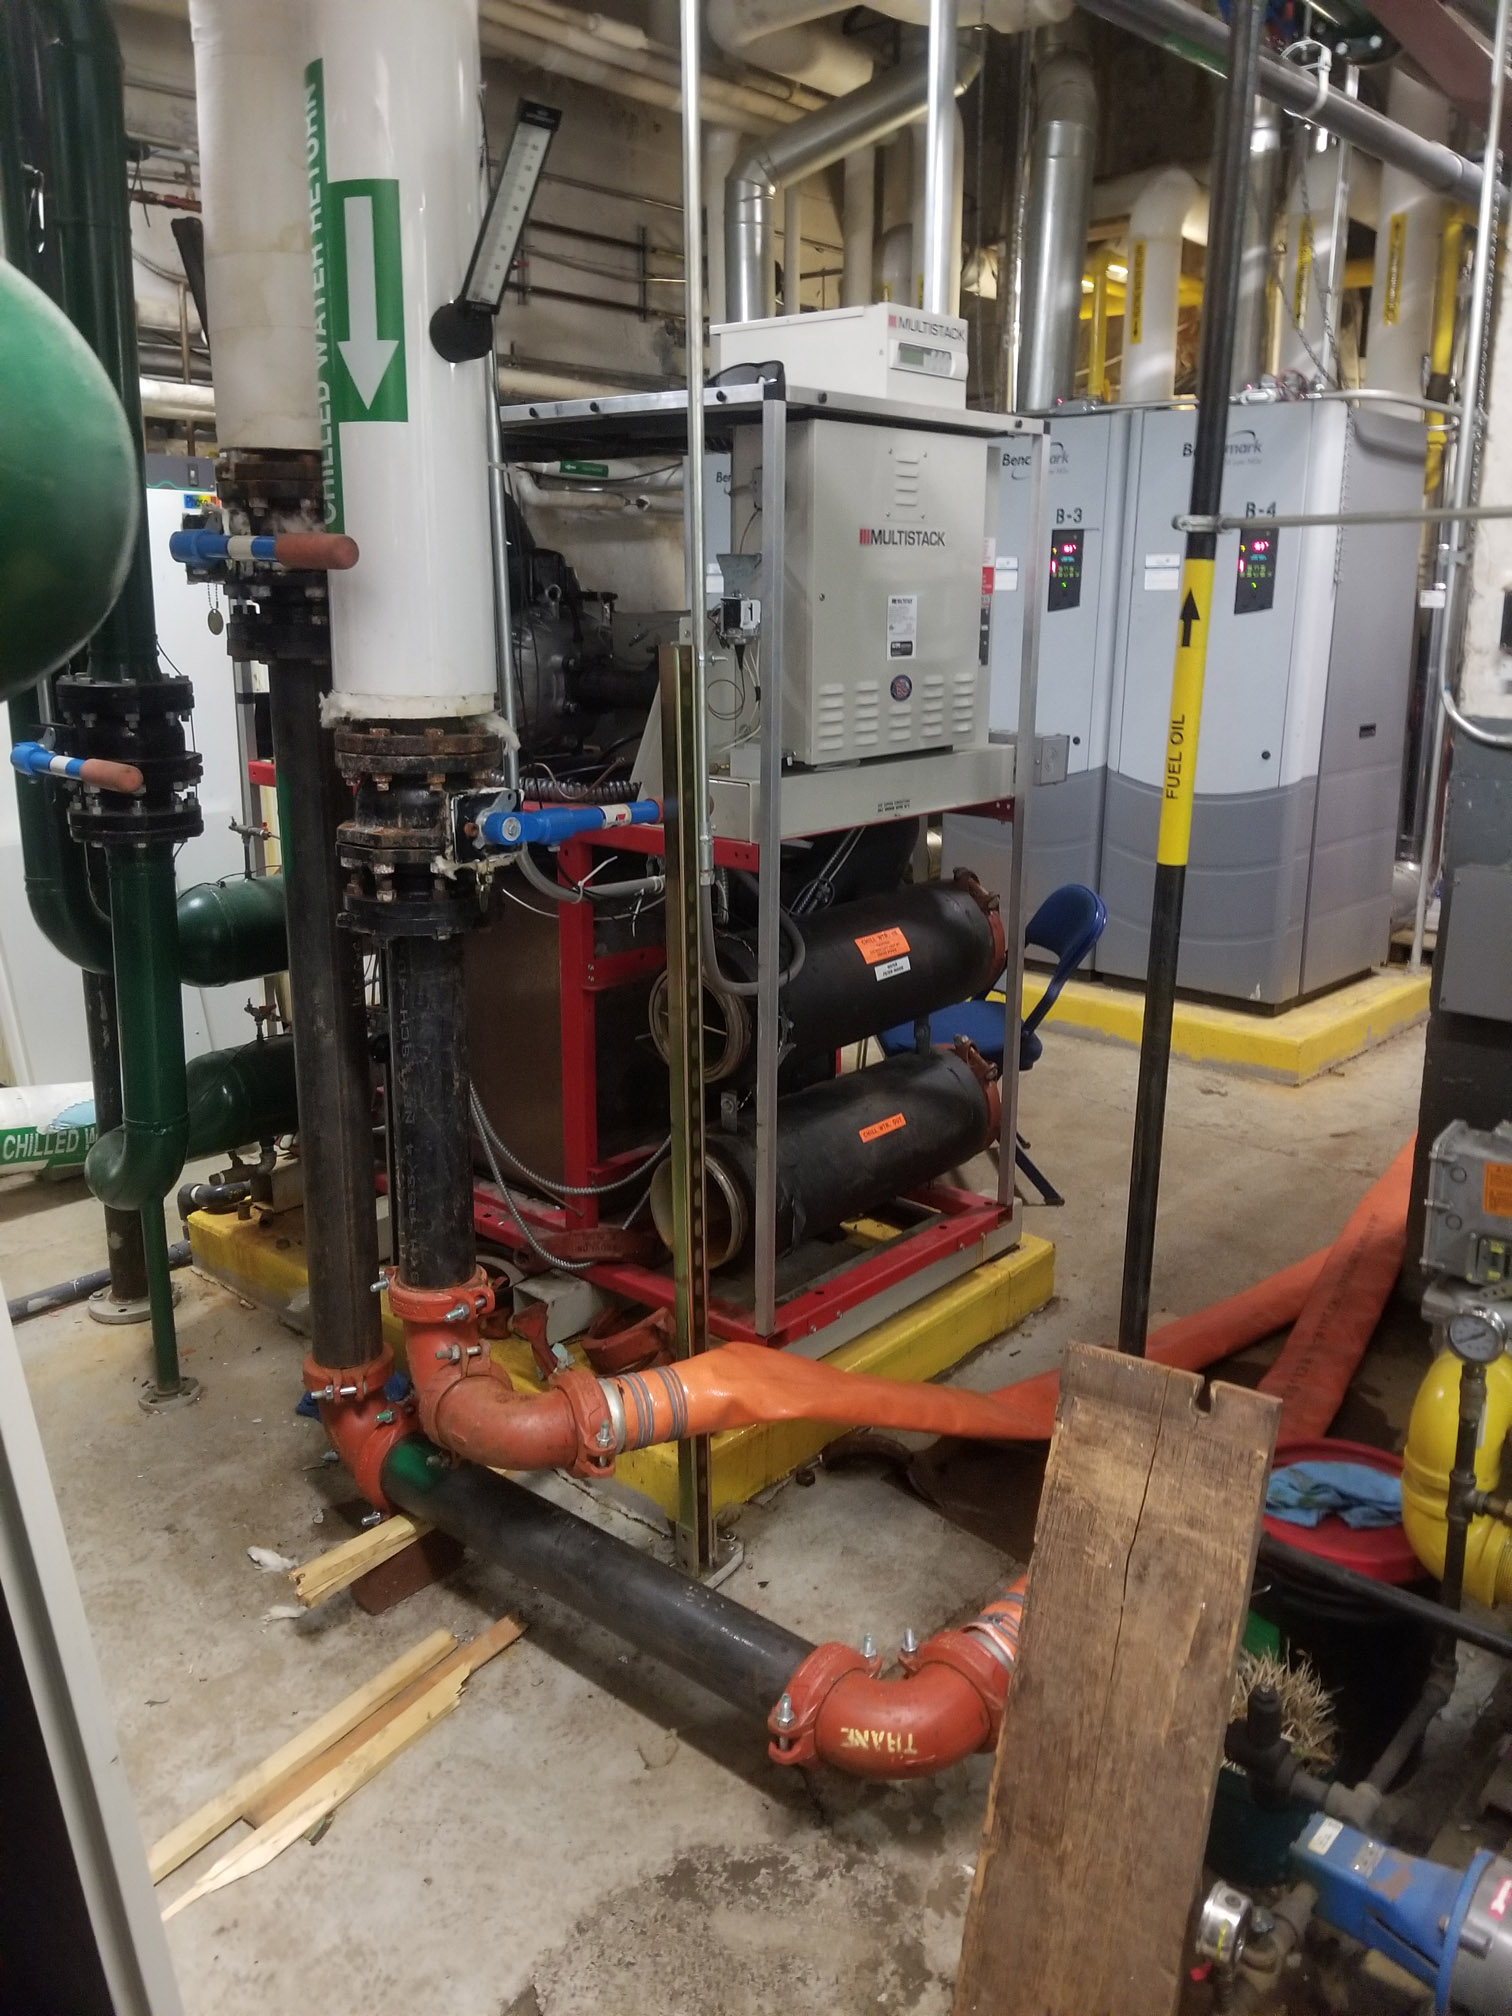 Air Cooled Chiller Rental North Fort Myers FL, Chiller AC Rental North Fort Myers FL, Temporary Chiller North Fort Myers FL, Rental Chiller Installation North Fort Myers FL